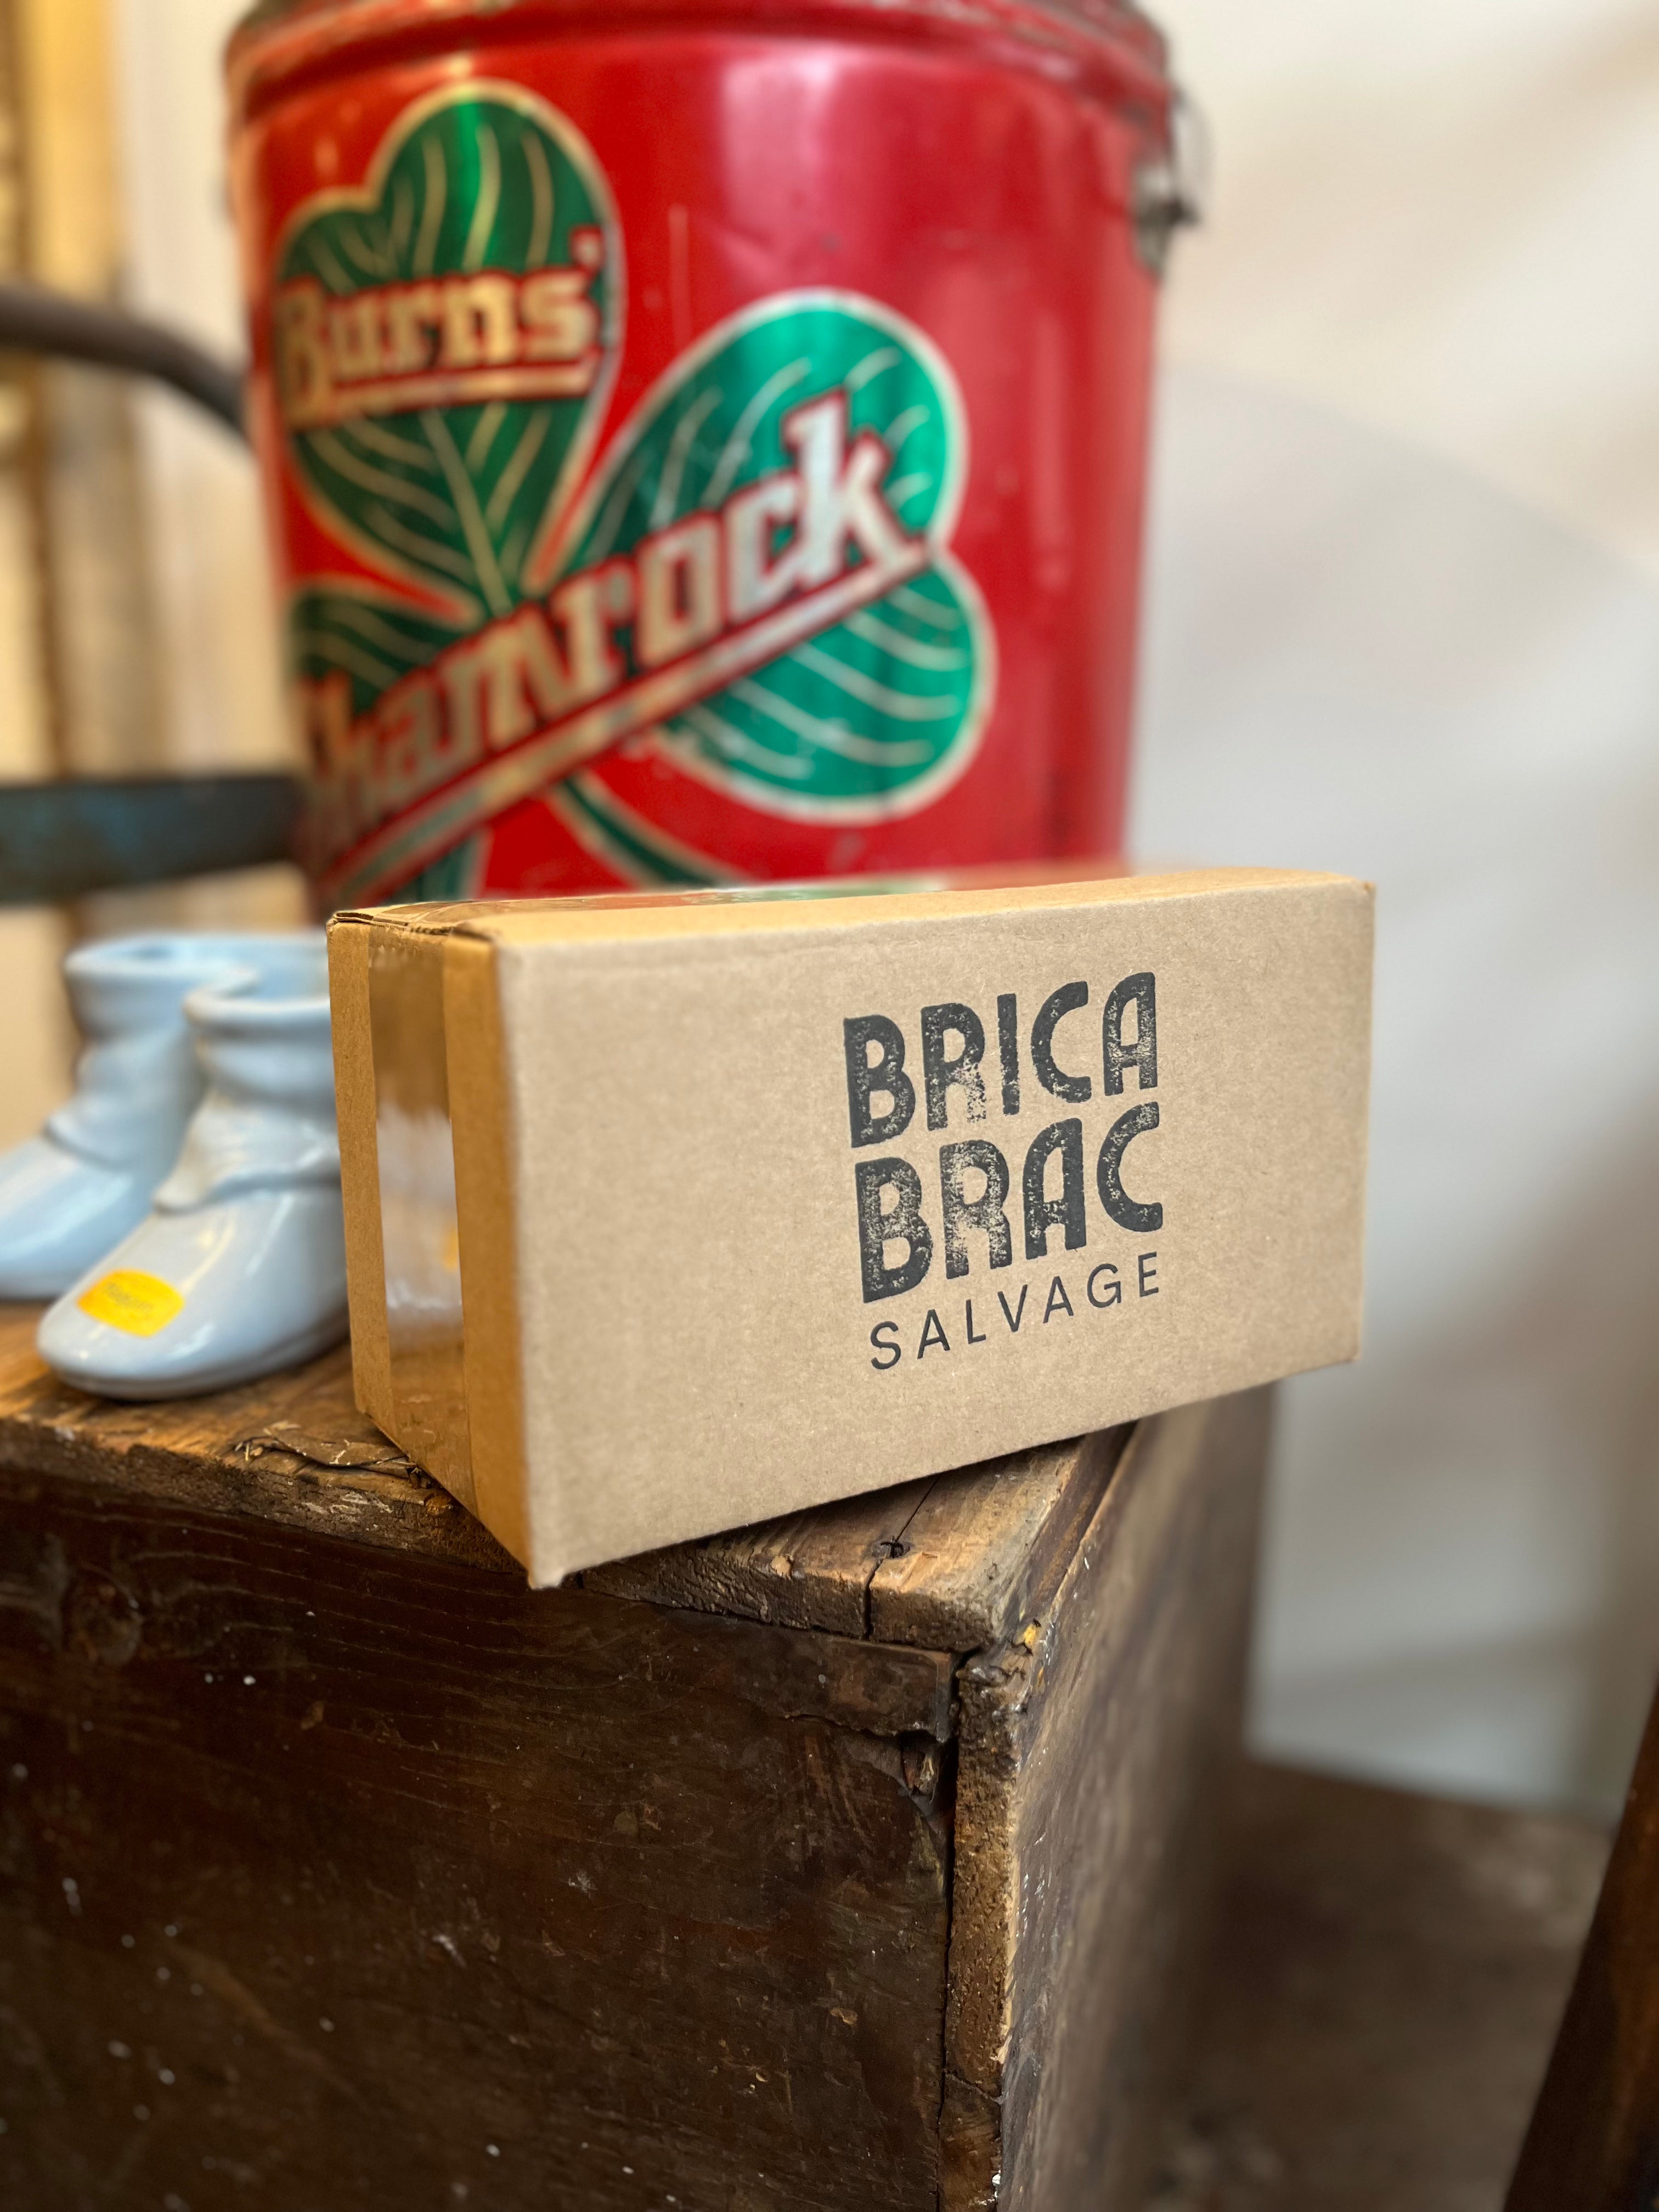 Brica Brac Salvage Mystery Box - full of salvaged surprises, each box is unique